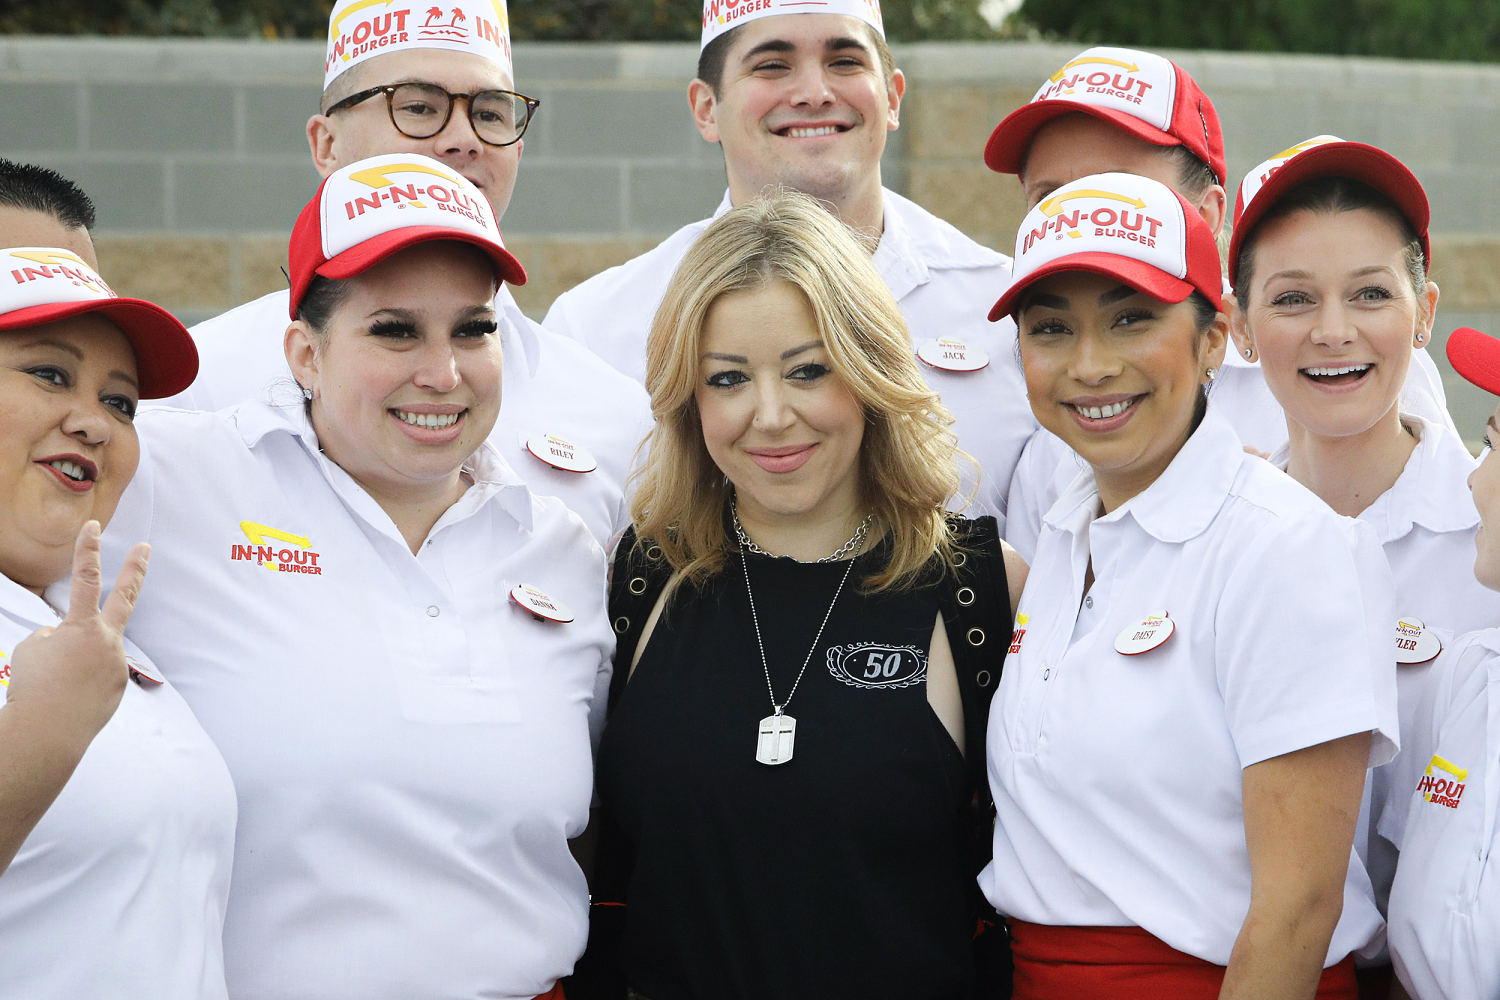 How In-N-Out Burger’s president runs her fast-food empire: Keep it simple, affordable and close